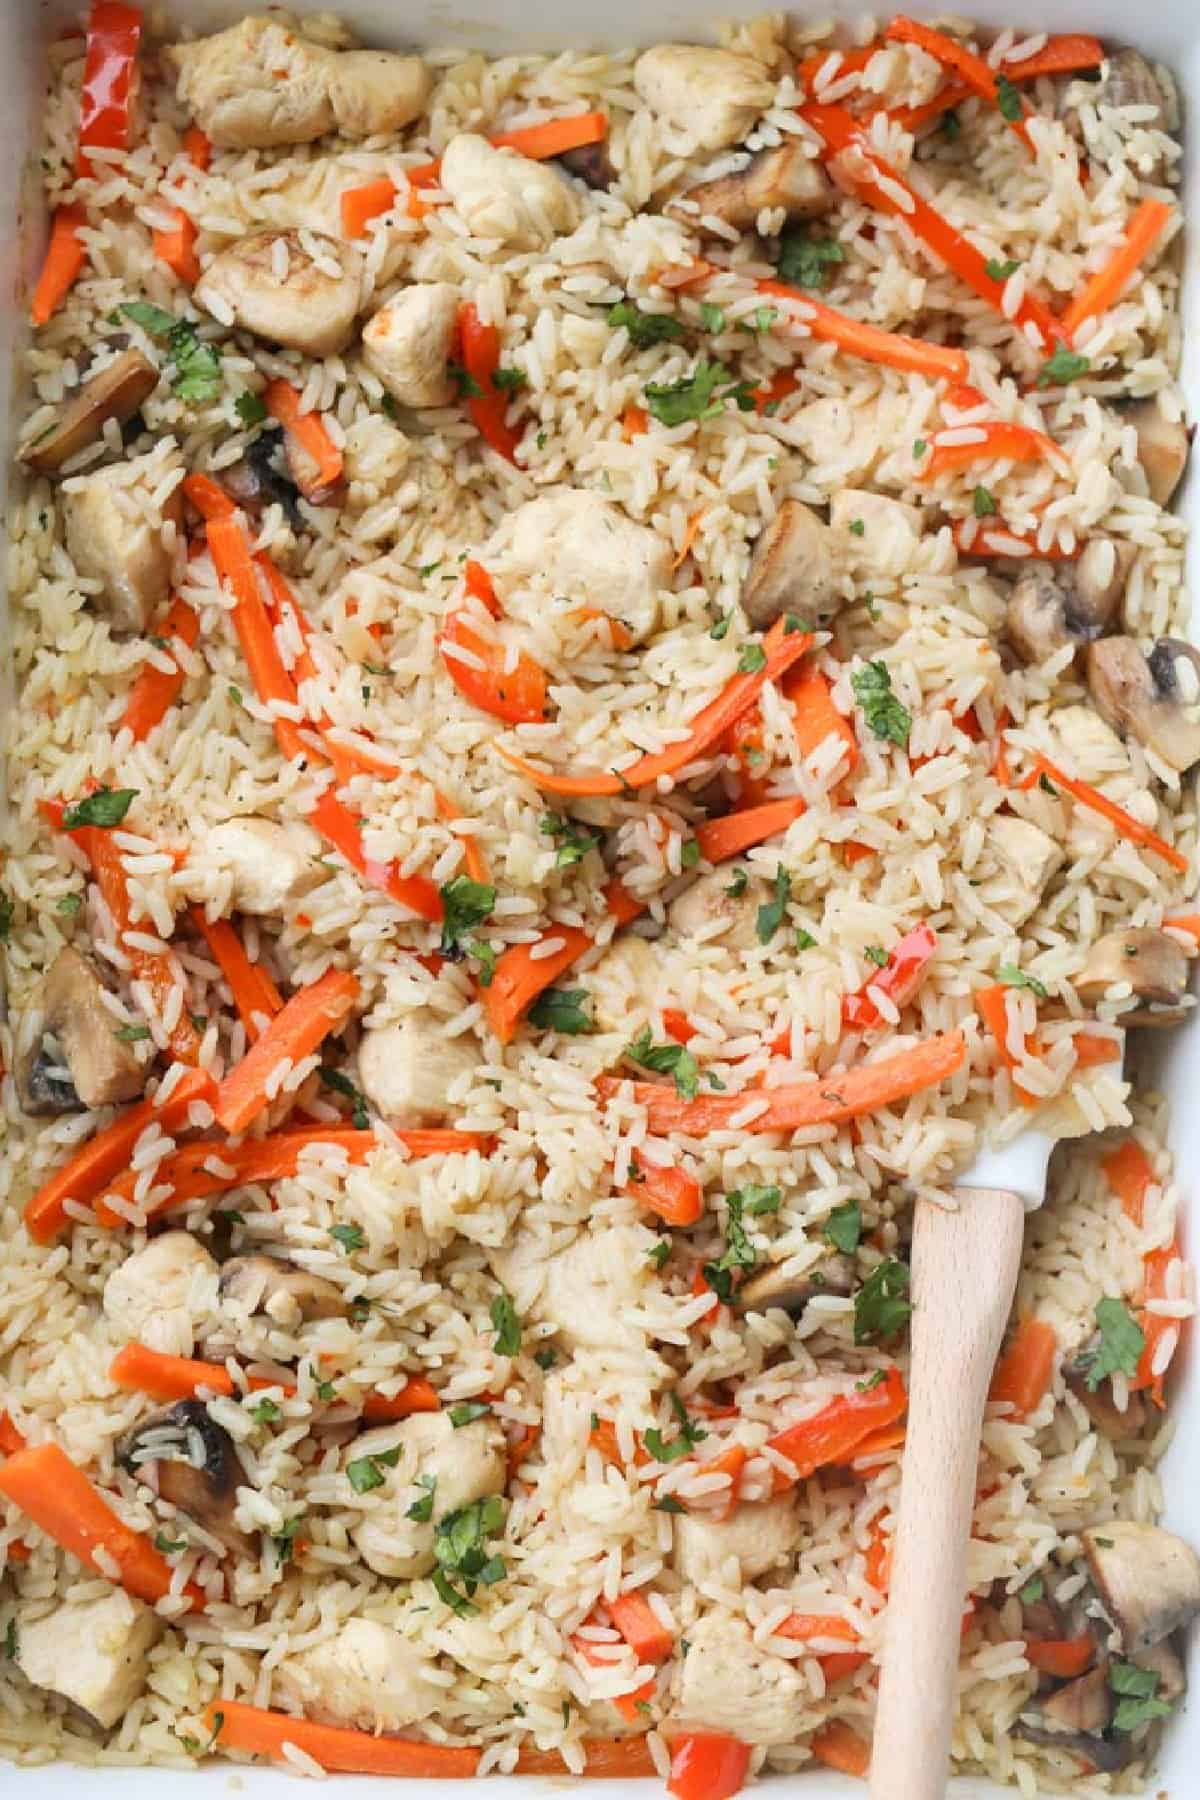 Baked chicken and rice with carrots and greens.